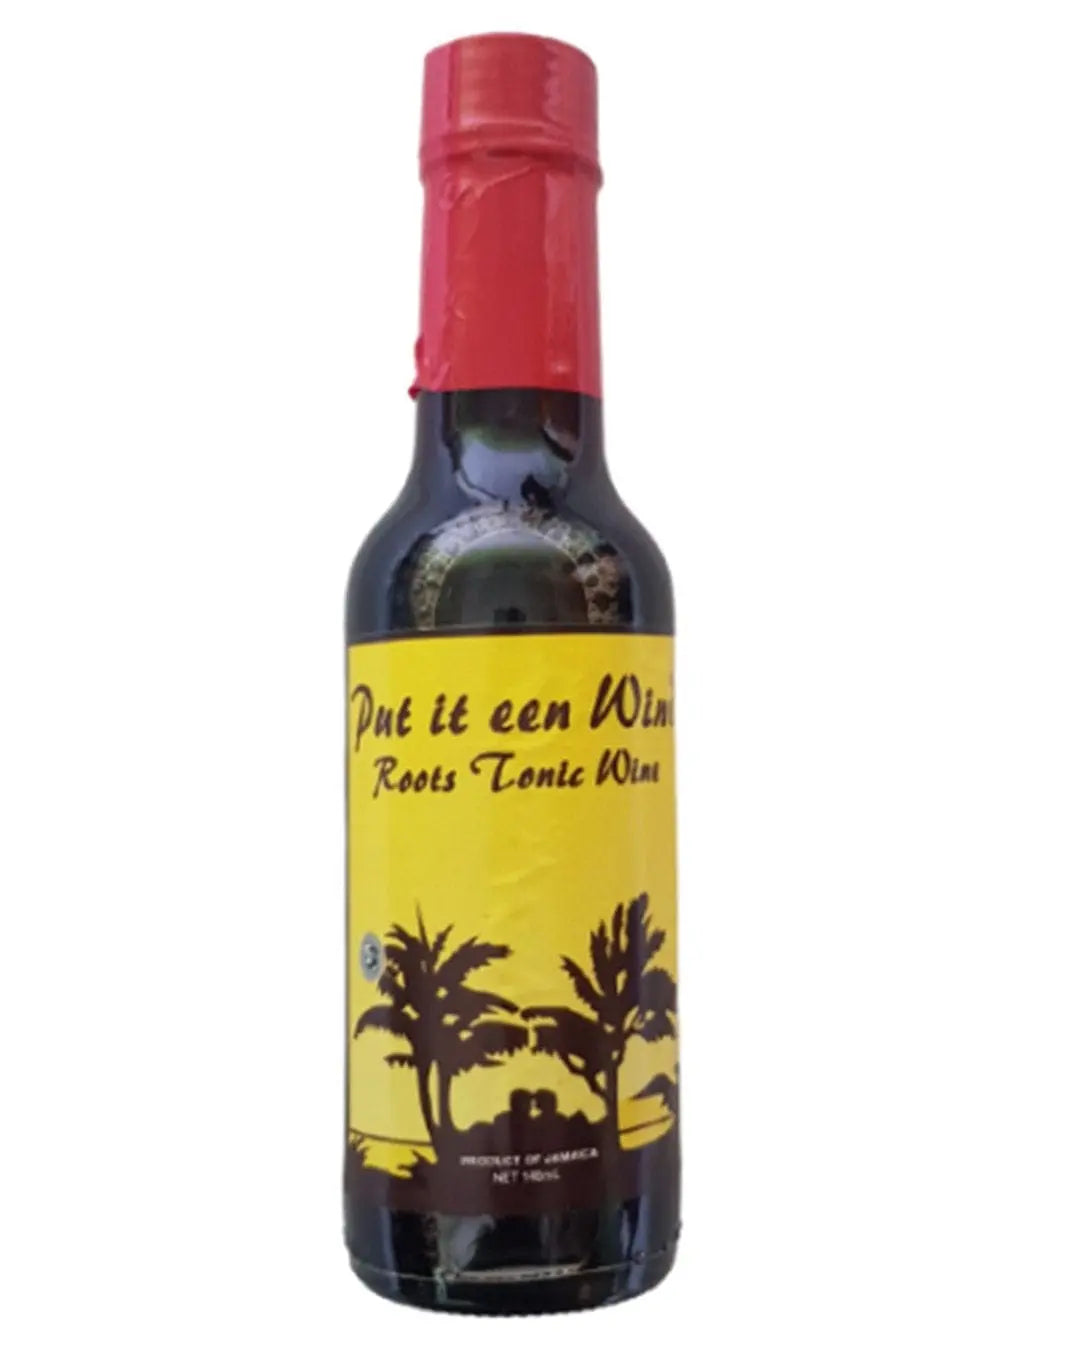 Put It Een Wine Roots Tonic Wine Multipack, 148 ml Fortified & Other Wines